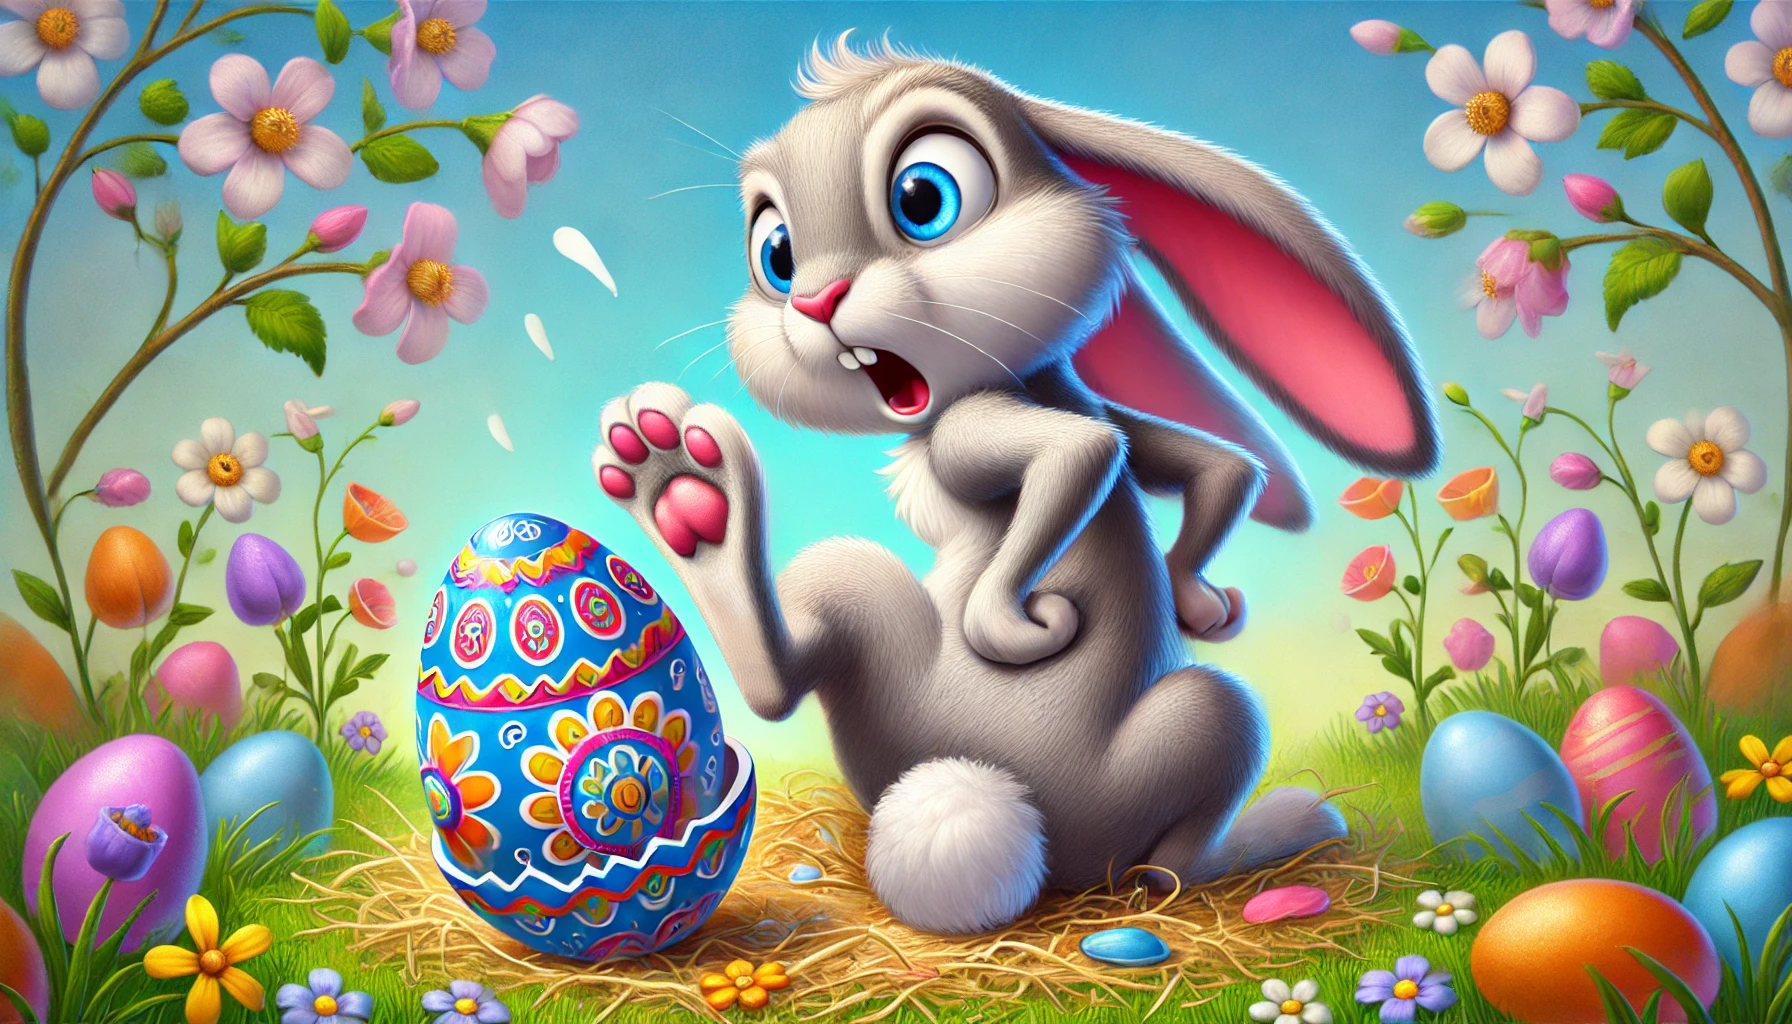 A comical and whimsical image of a rabbit squatting and just finishing giving birth to a smaller decorated Easter egg, with the egg positioned as if it has just come out of the rabbit. The rabbit should have a surprised and playful expression. The egg should be colorful with intricate designs. The background should be a vibrant spring landscape with flowers and greenery, adding to the joyful and humorous atmosphere.